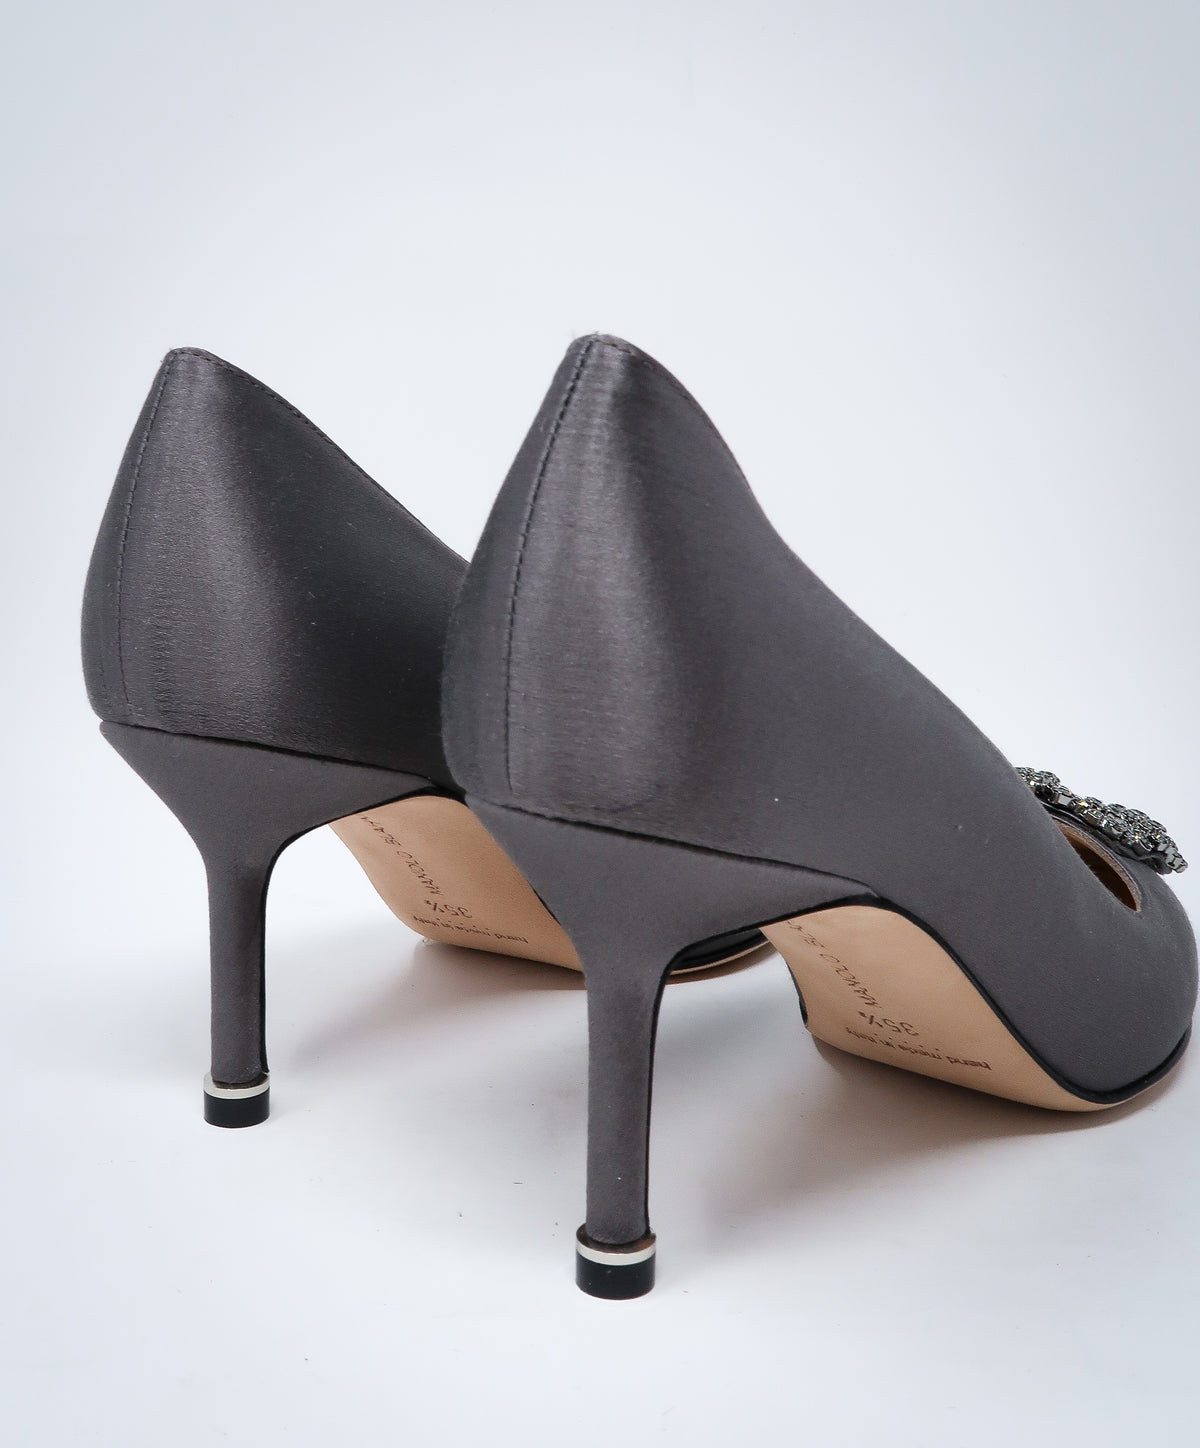 grey satin heels with dark silver buckle ornament (back view)